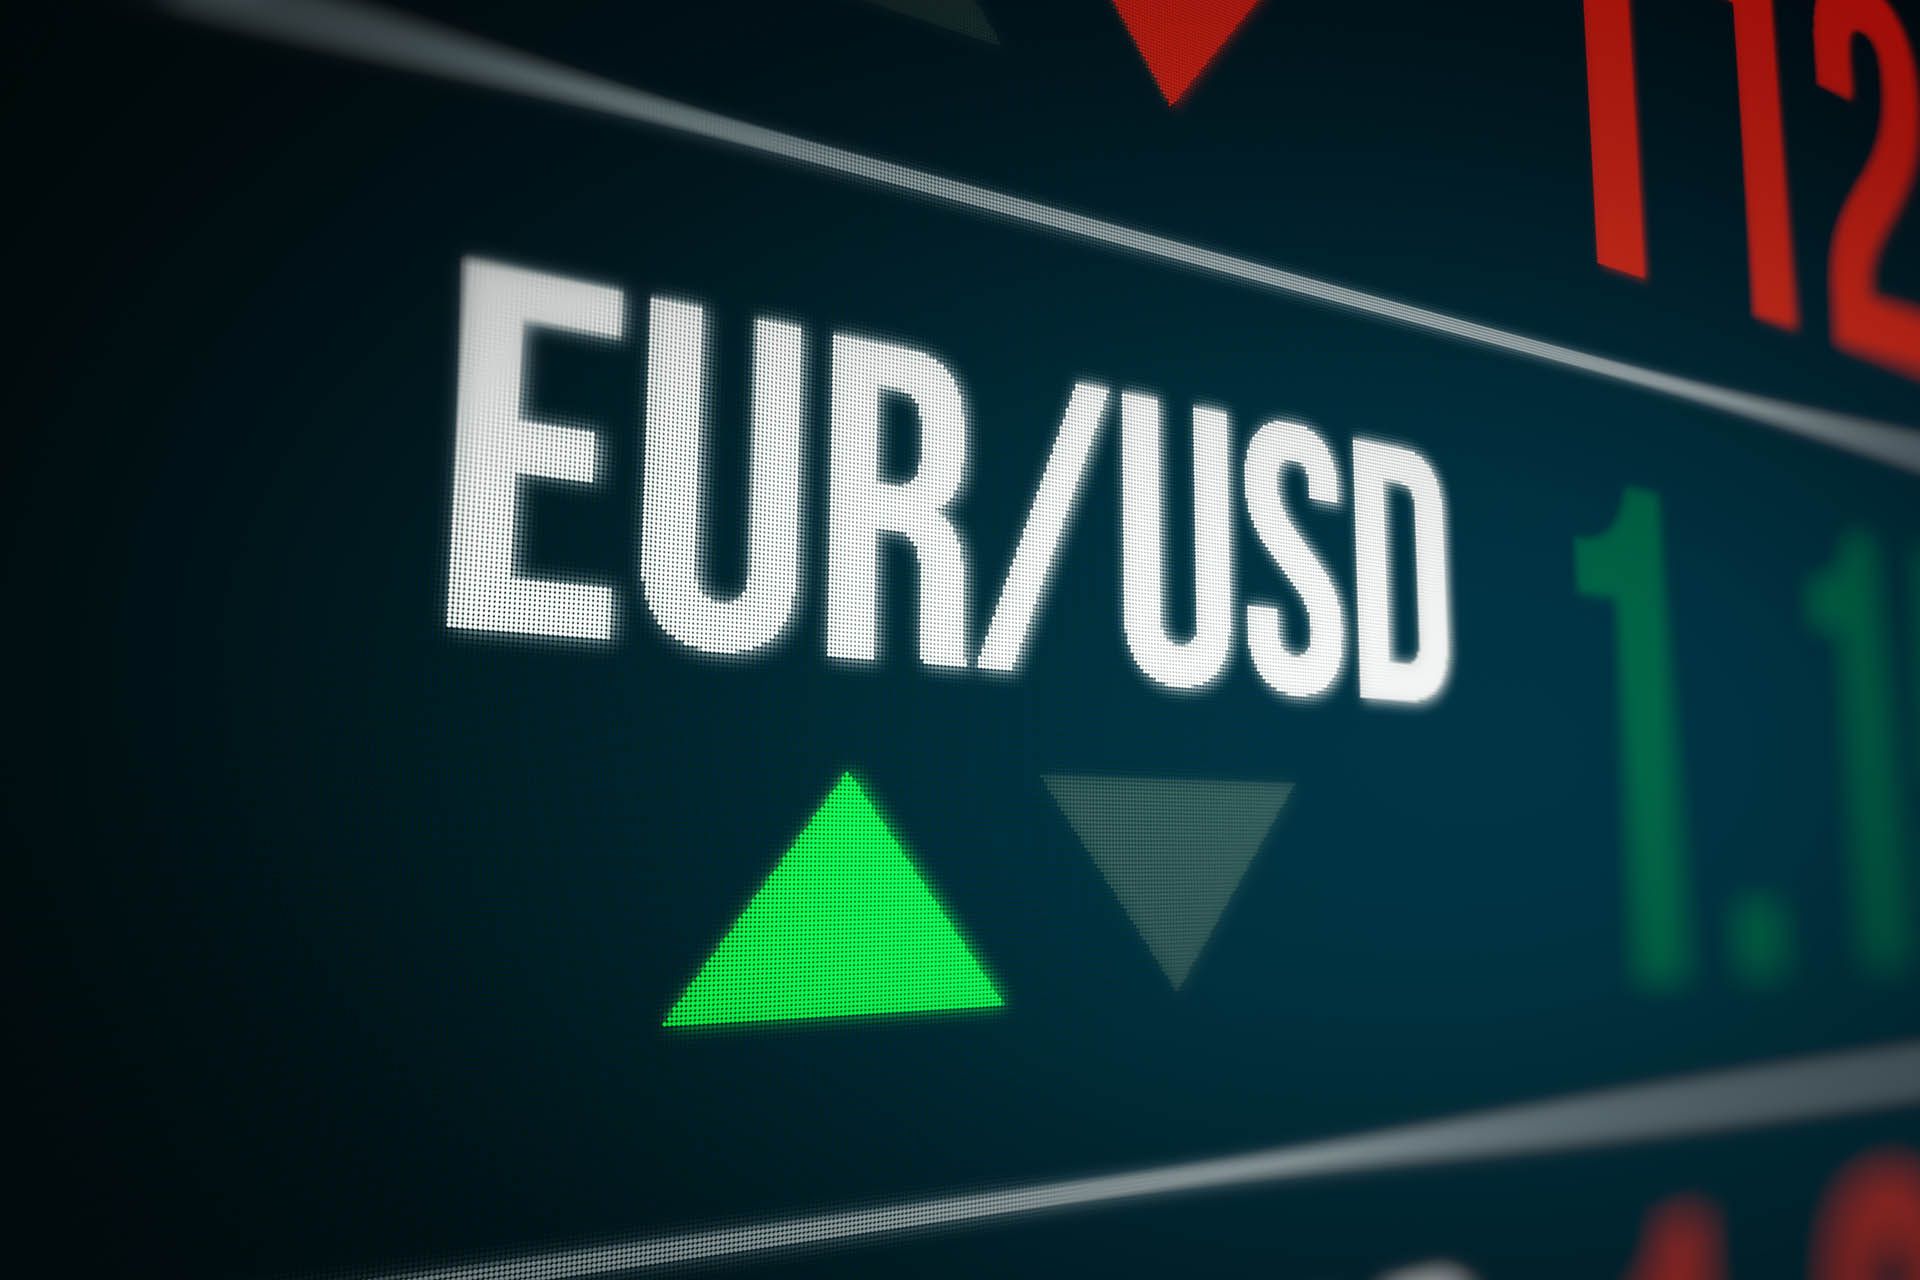 July, 02 - EUR/USD pushes higher and trades closer to 1.1300